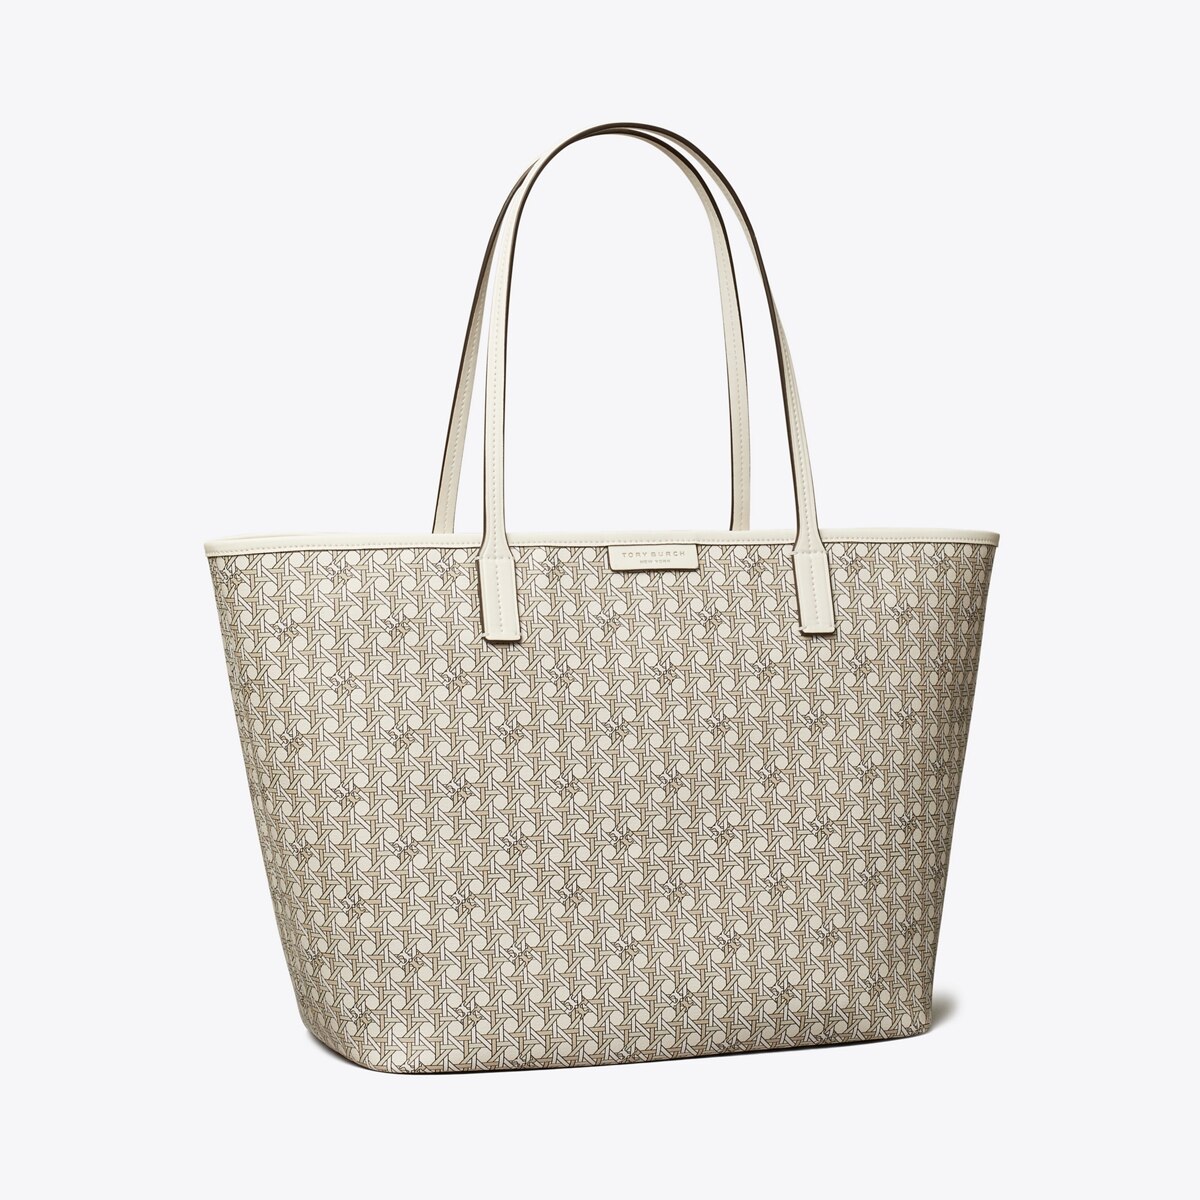 Ever-Ready Open Tote: Women's Designer Tote Bags | Tory Burch